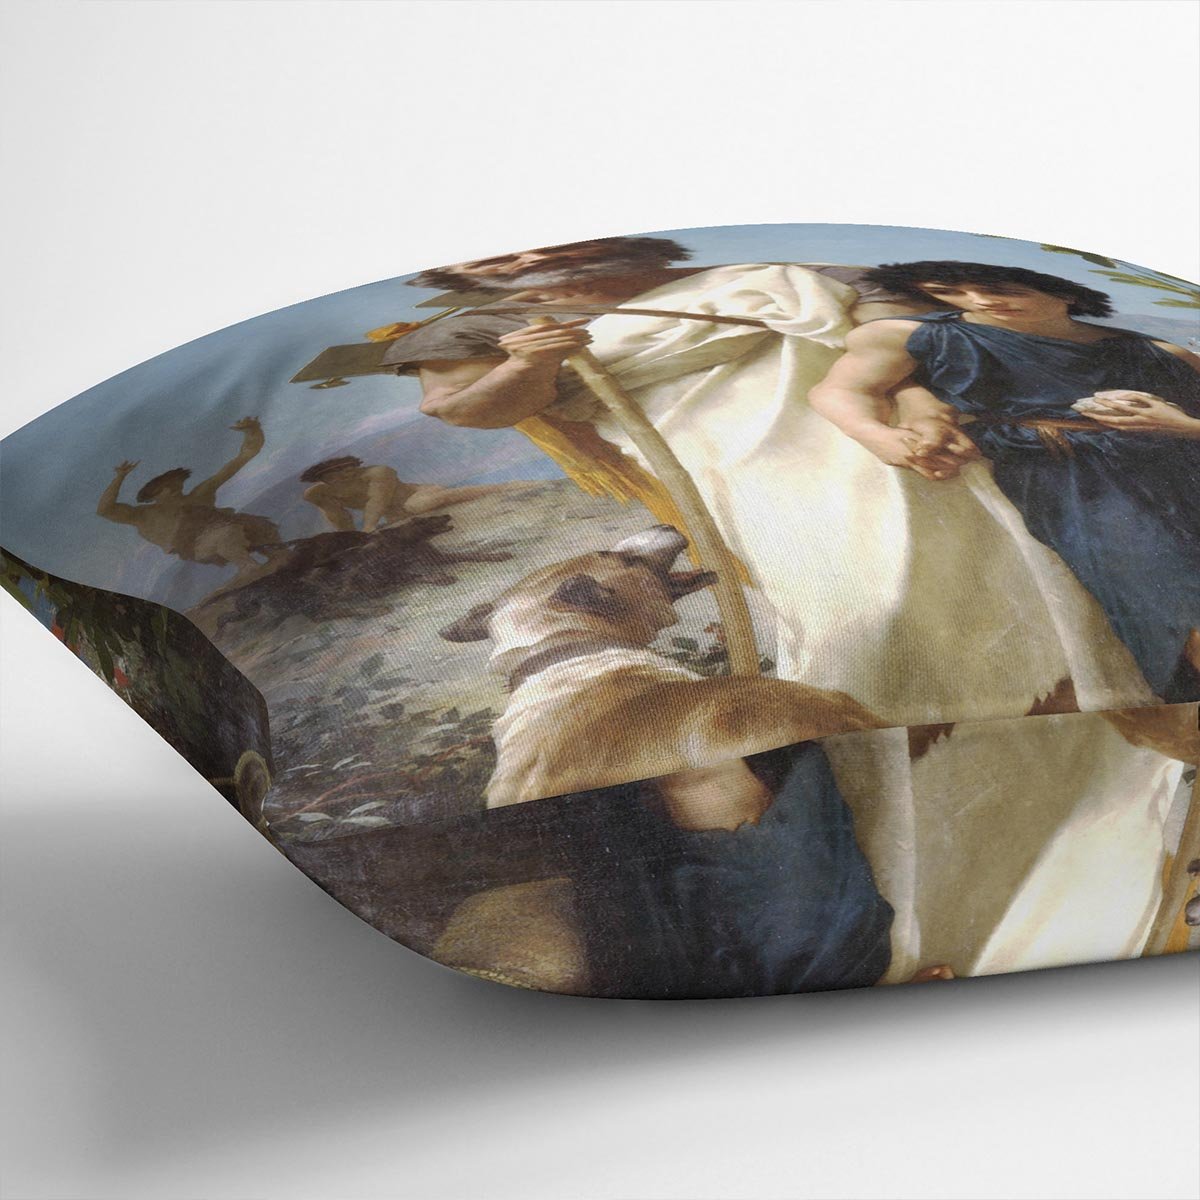 Homer and his Guide 1874 By Bouguereau Throw Pillow